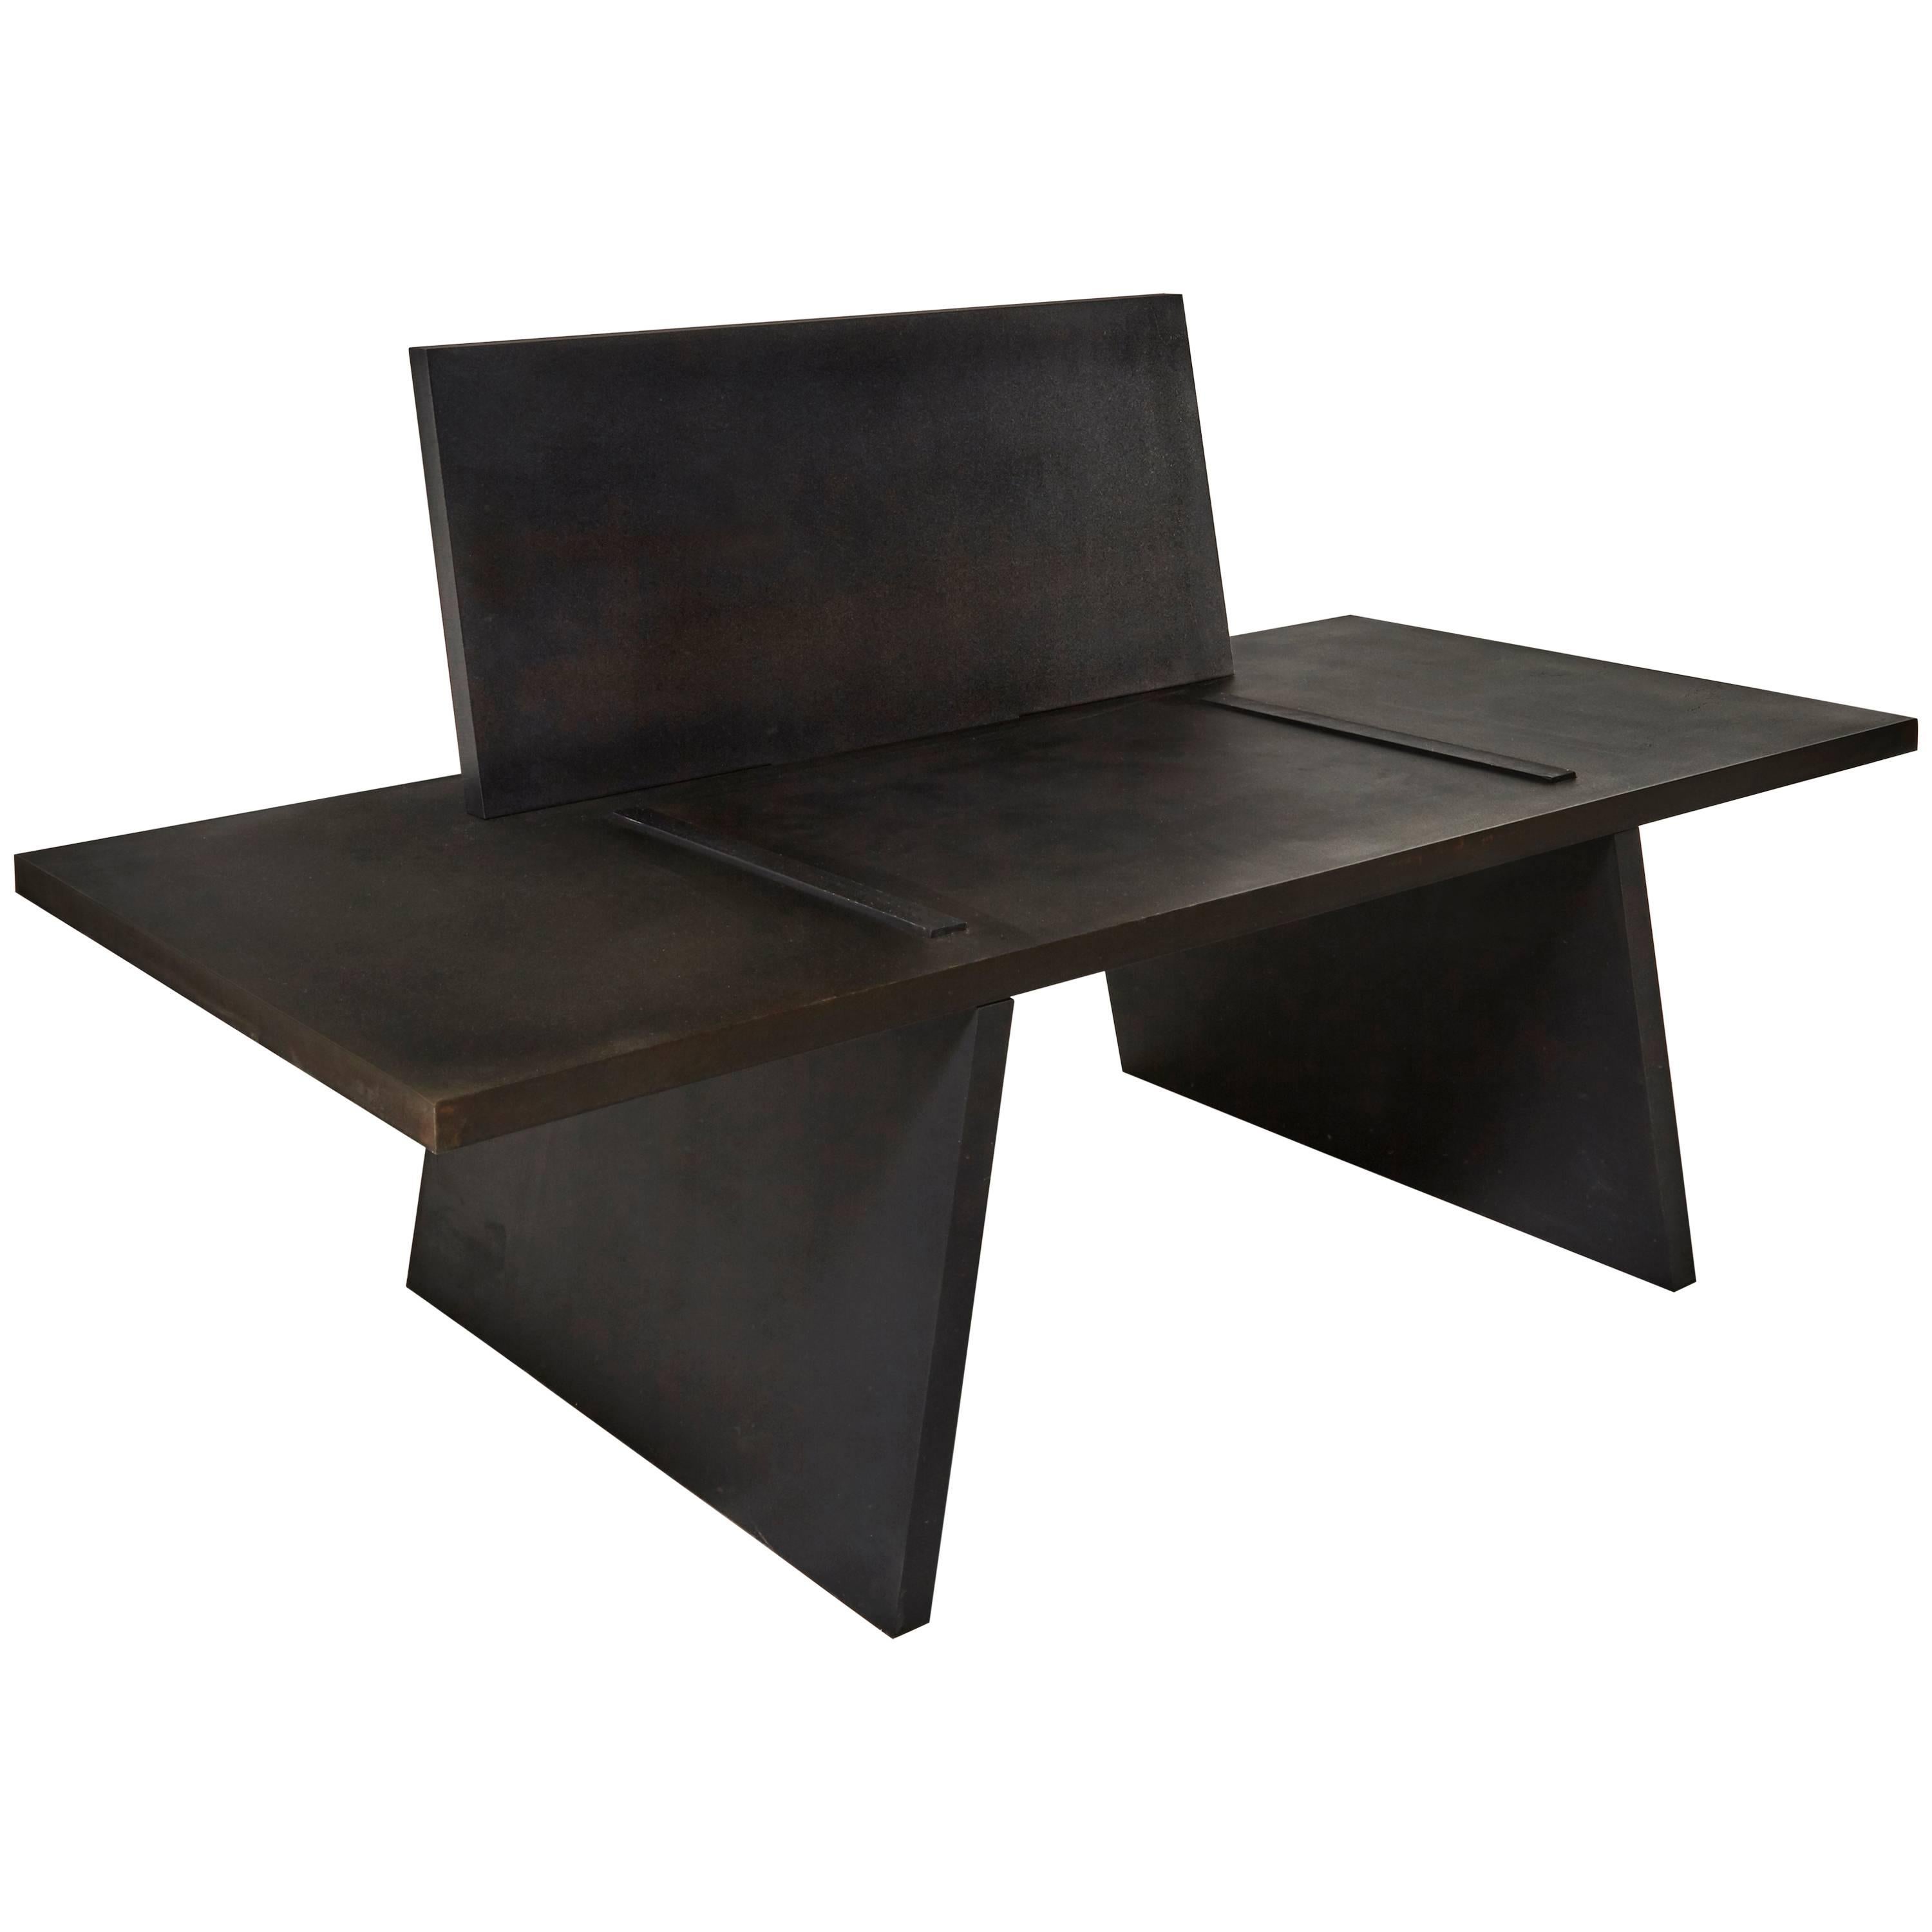  Gravity Chair in Blackened and Waxed Steel Plate by Eric Slayton For Sale